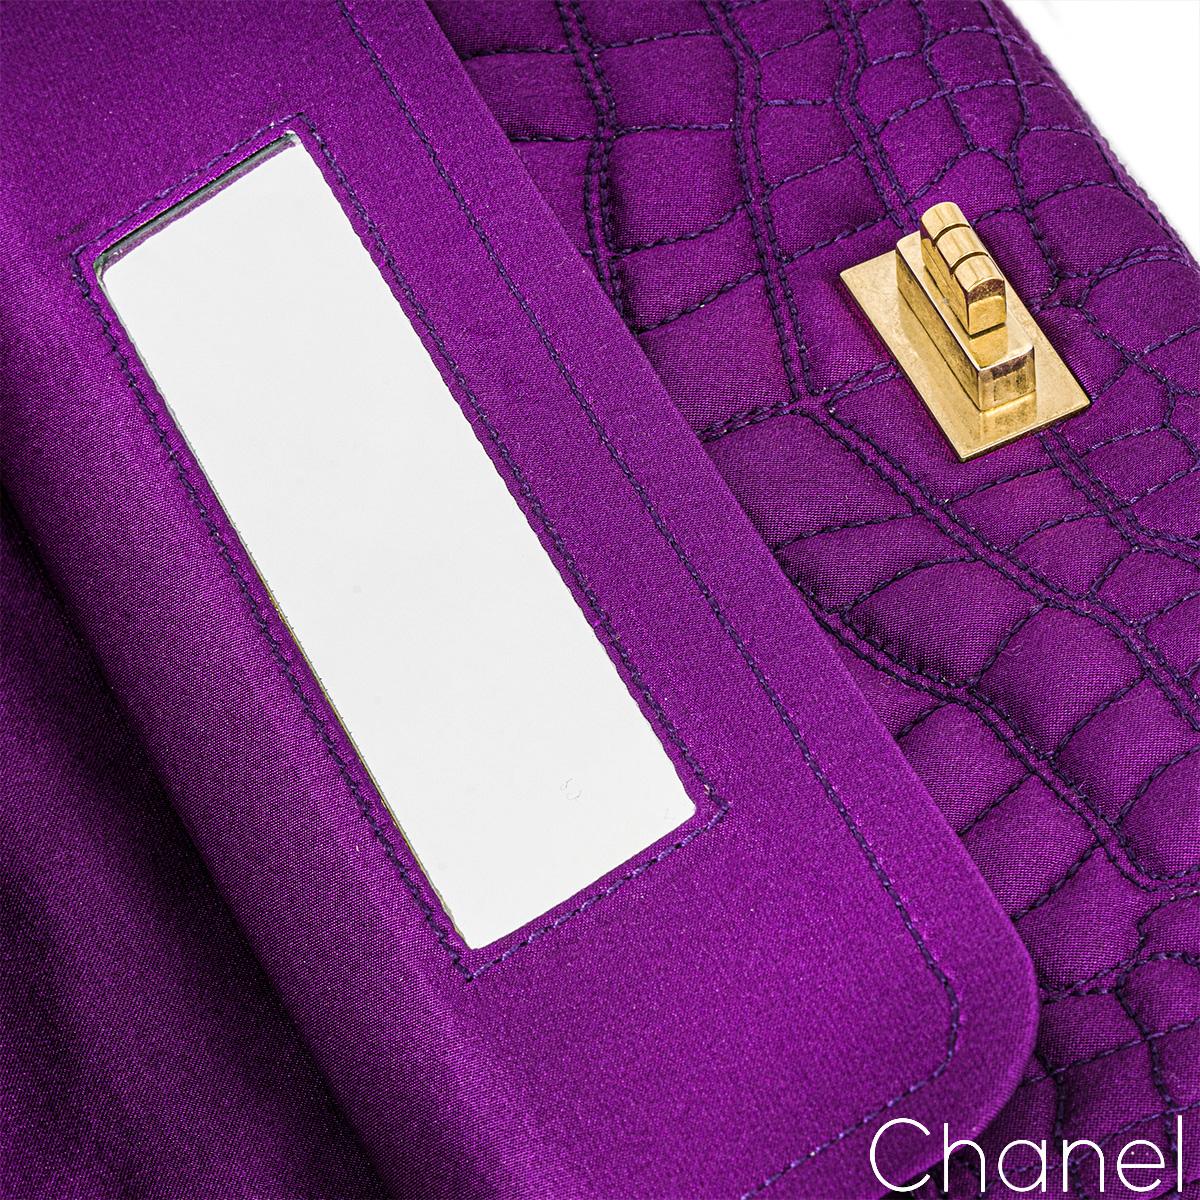 Chanel Purple Satin 2.55 Reissue Small 255 Bag For Sale 1